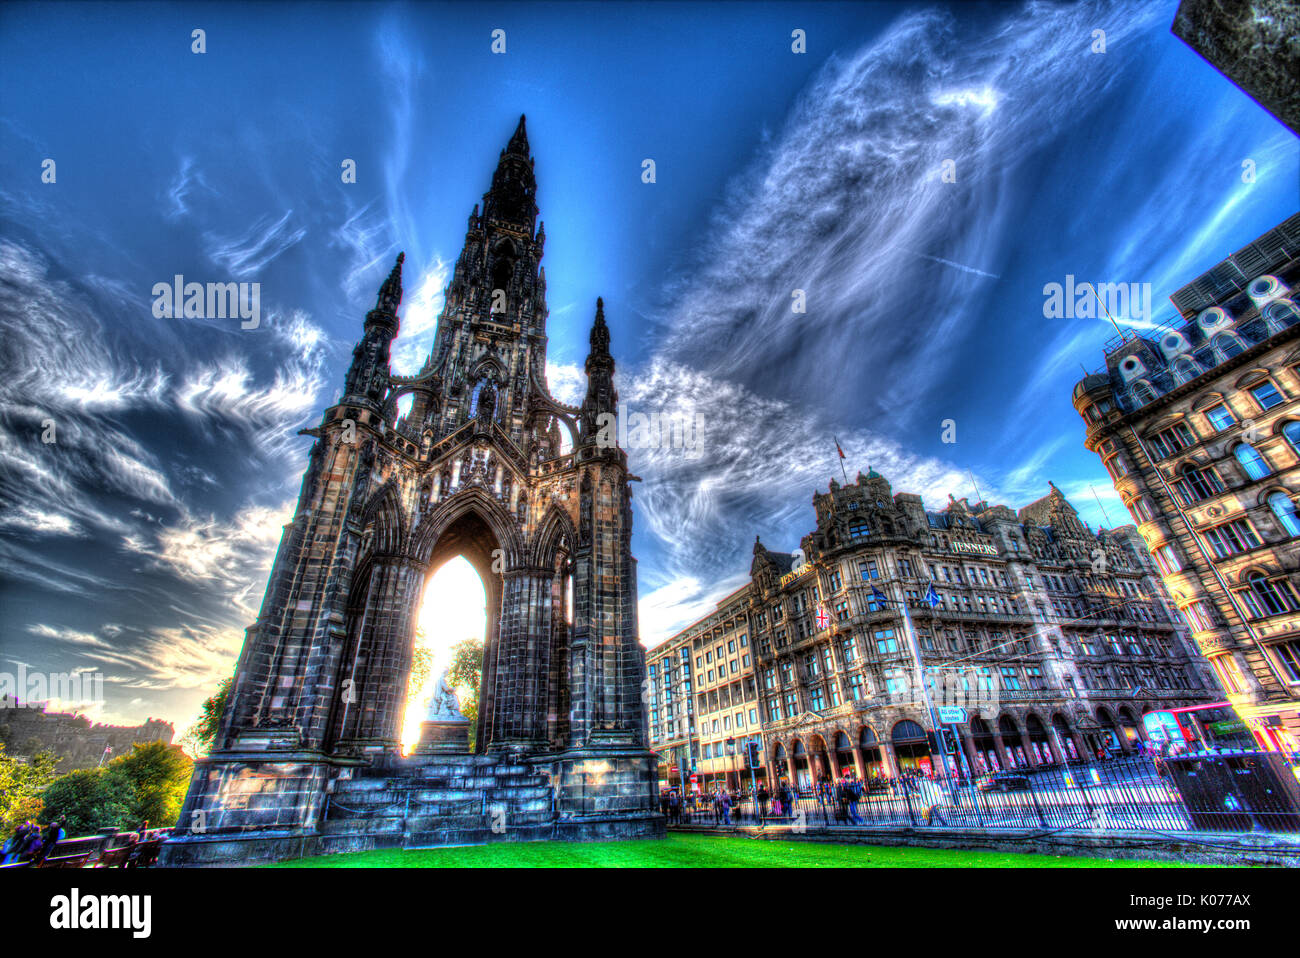 City of Edinburgh, Scotland. Picturesque view of Princes Street with the Scott Monument in the foreground. Stock Photo